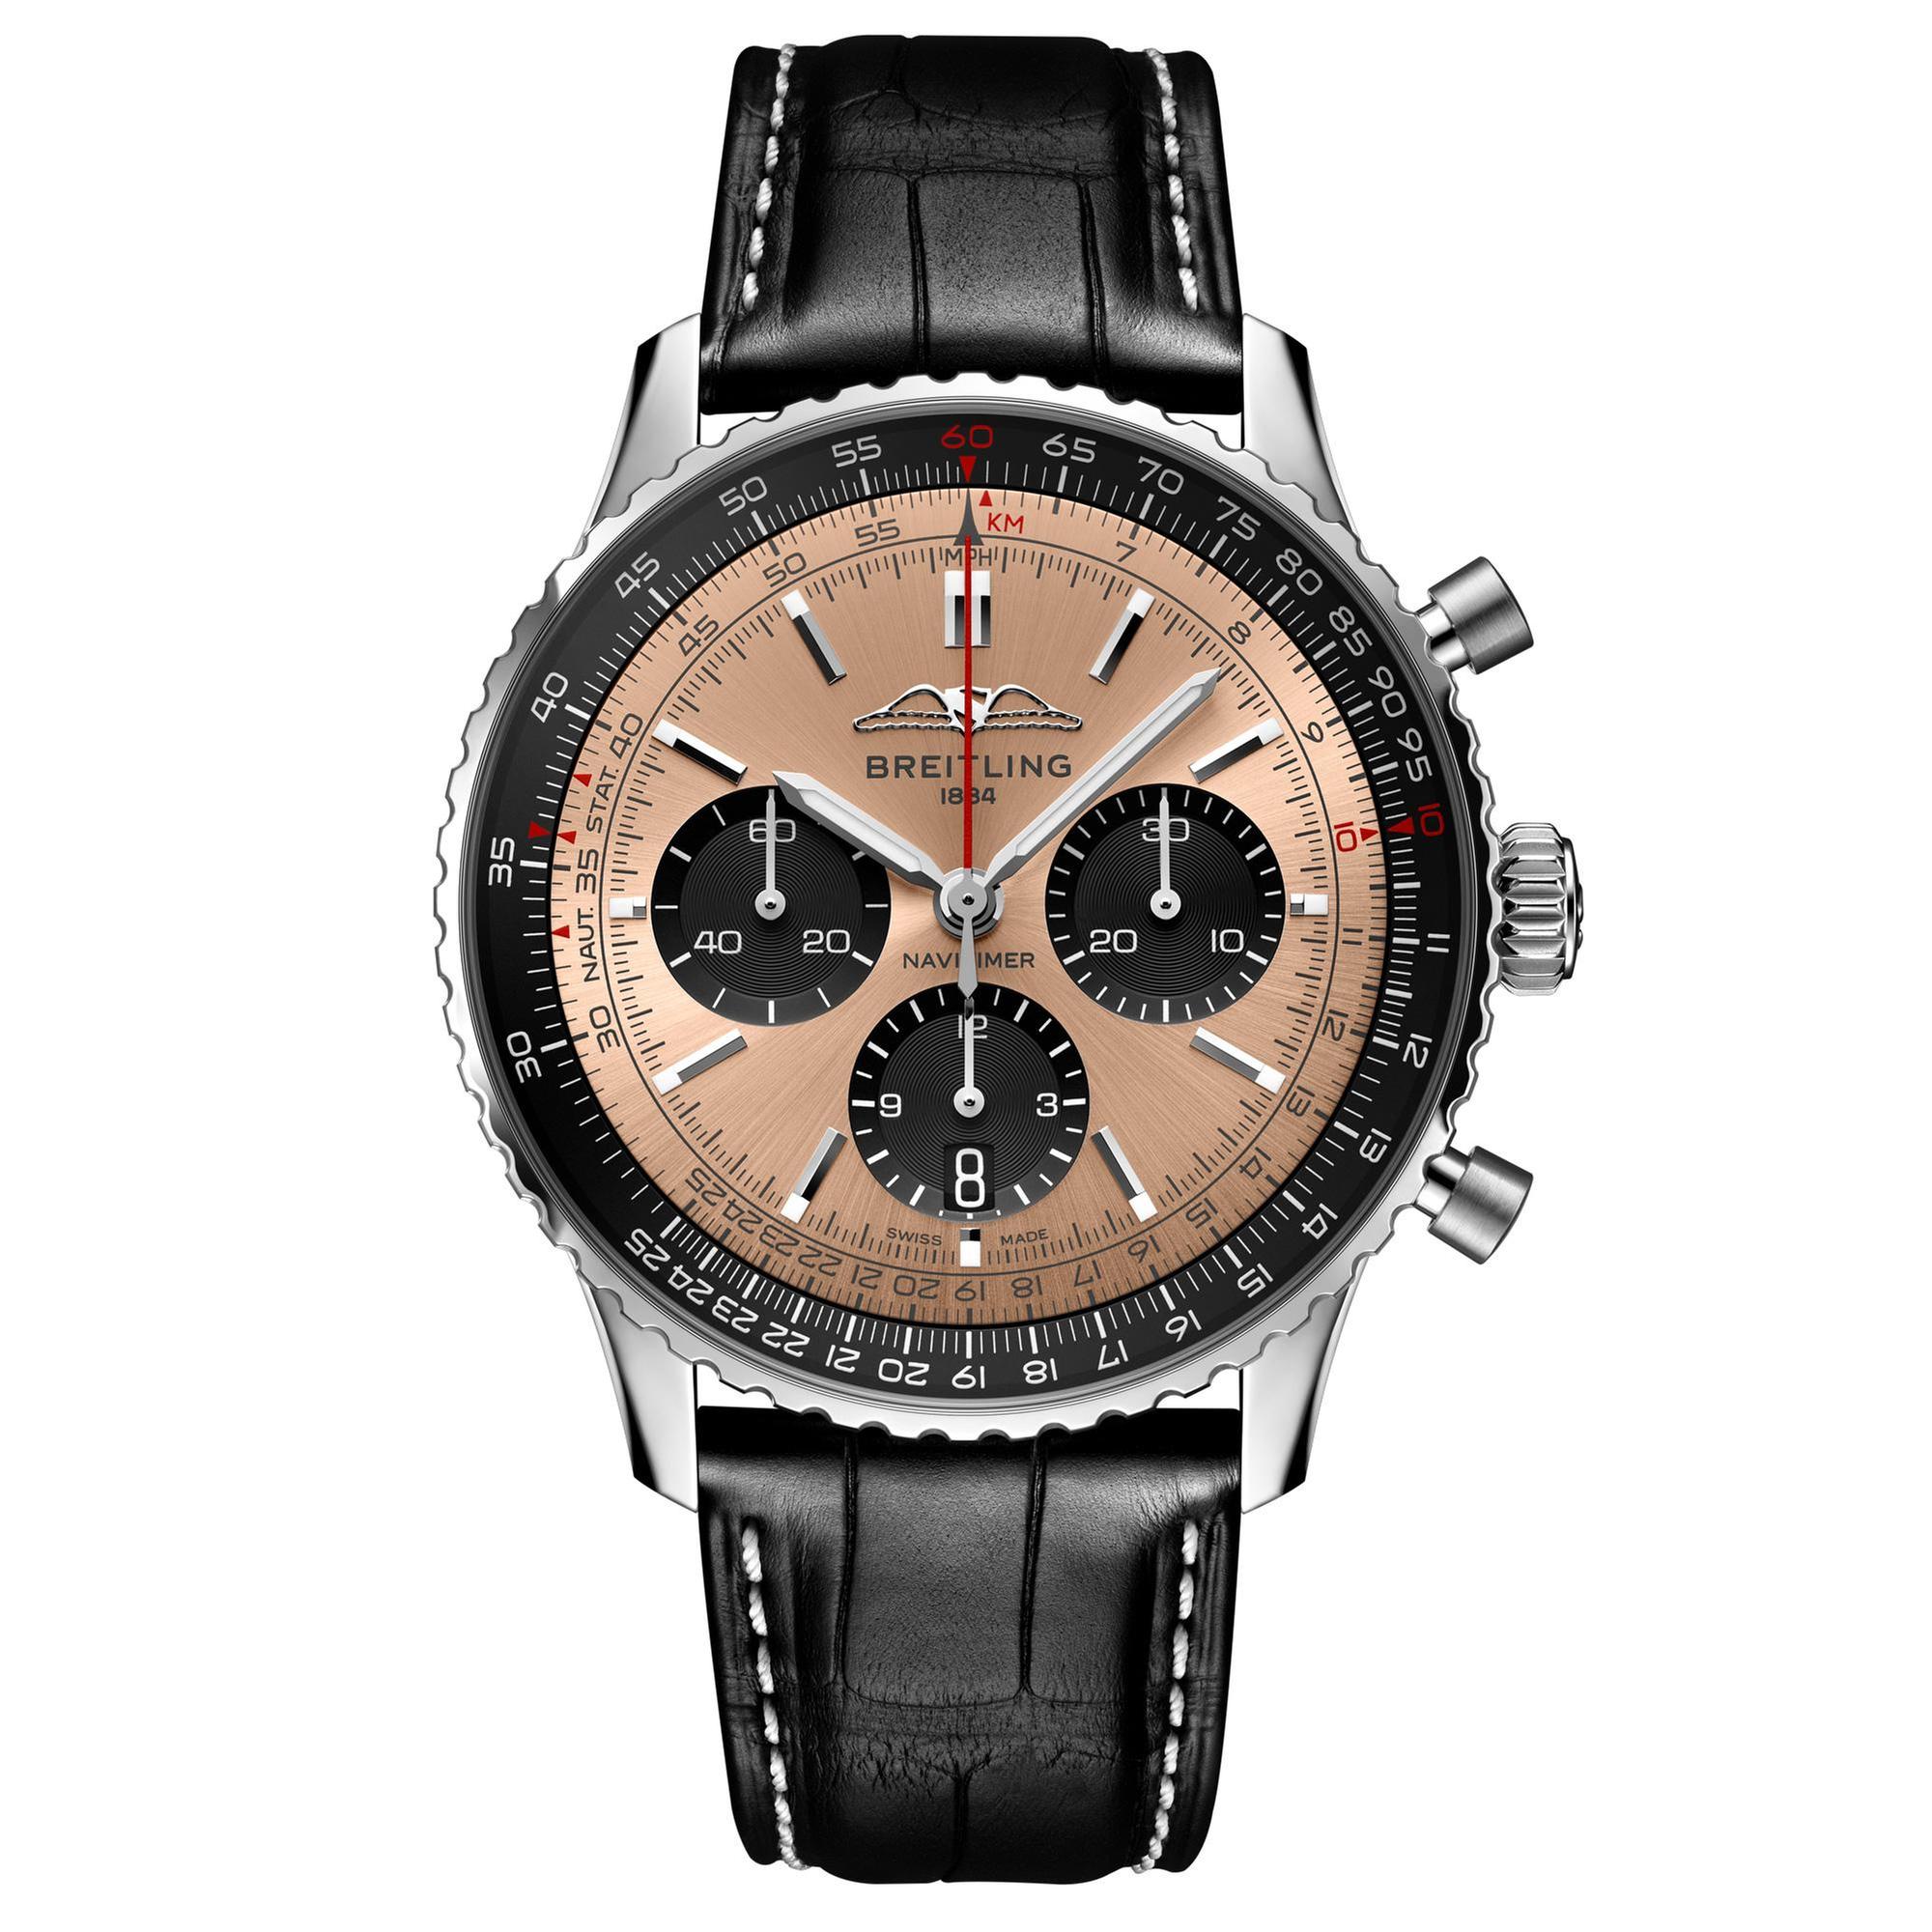 Navitimer Chronograph GMT 46: Functionality meets style